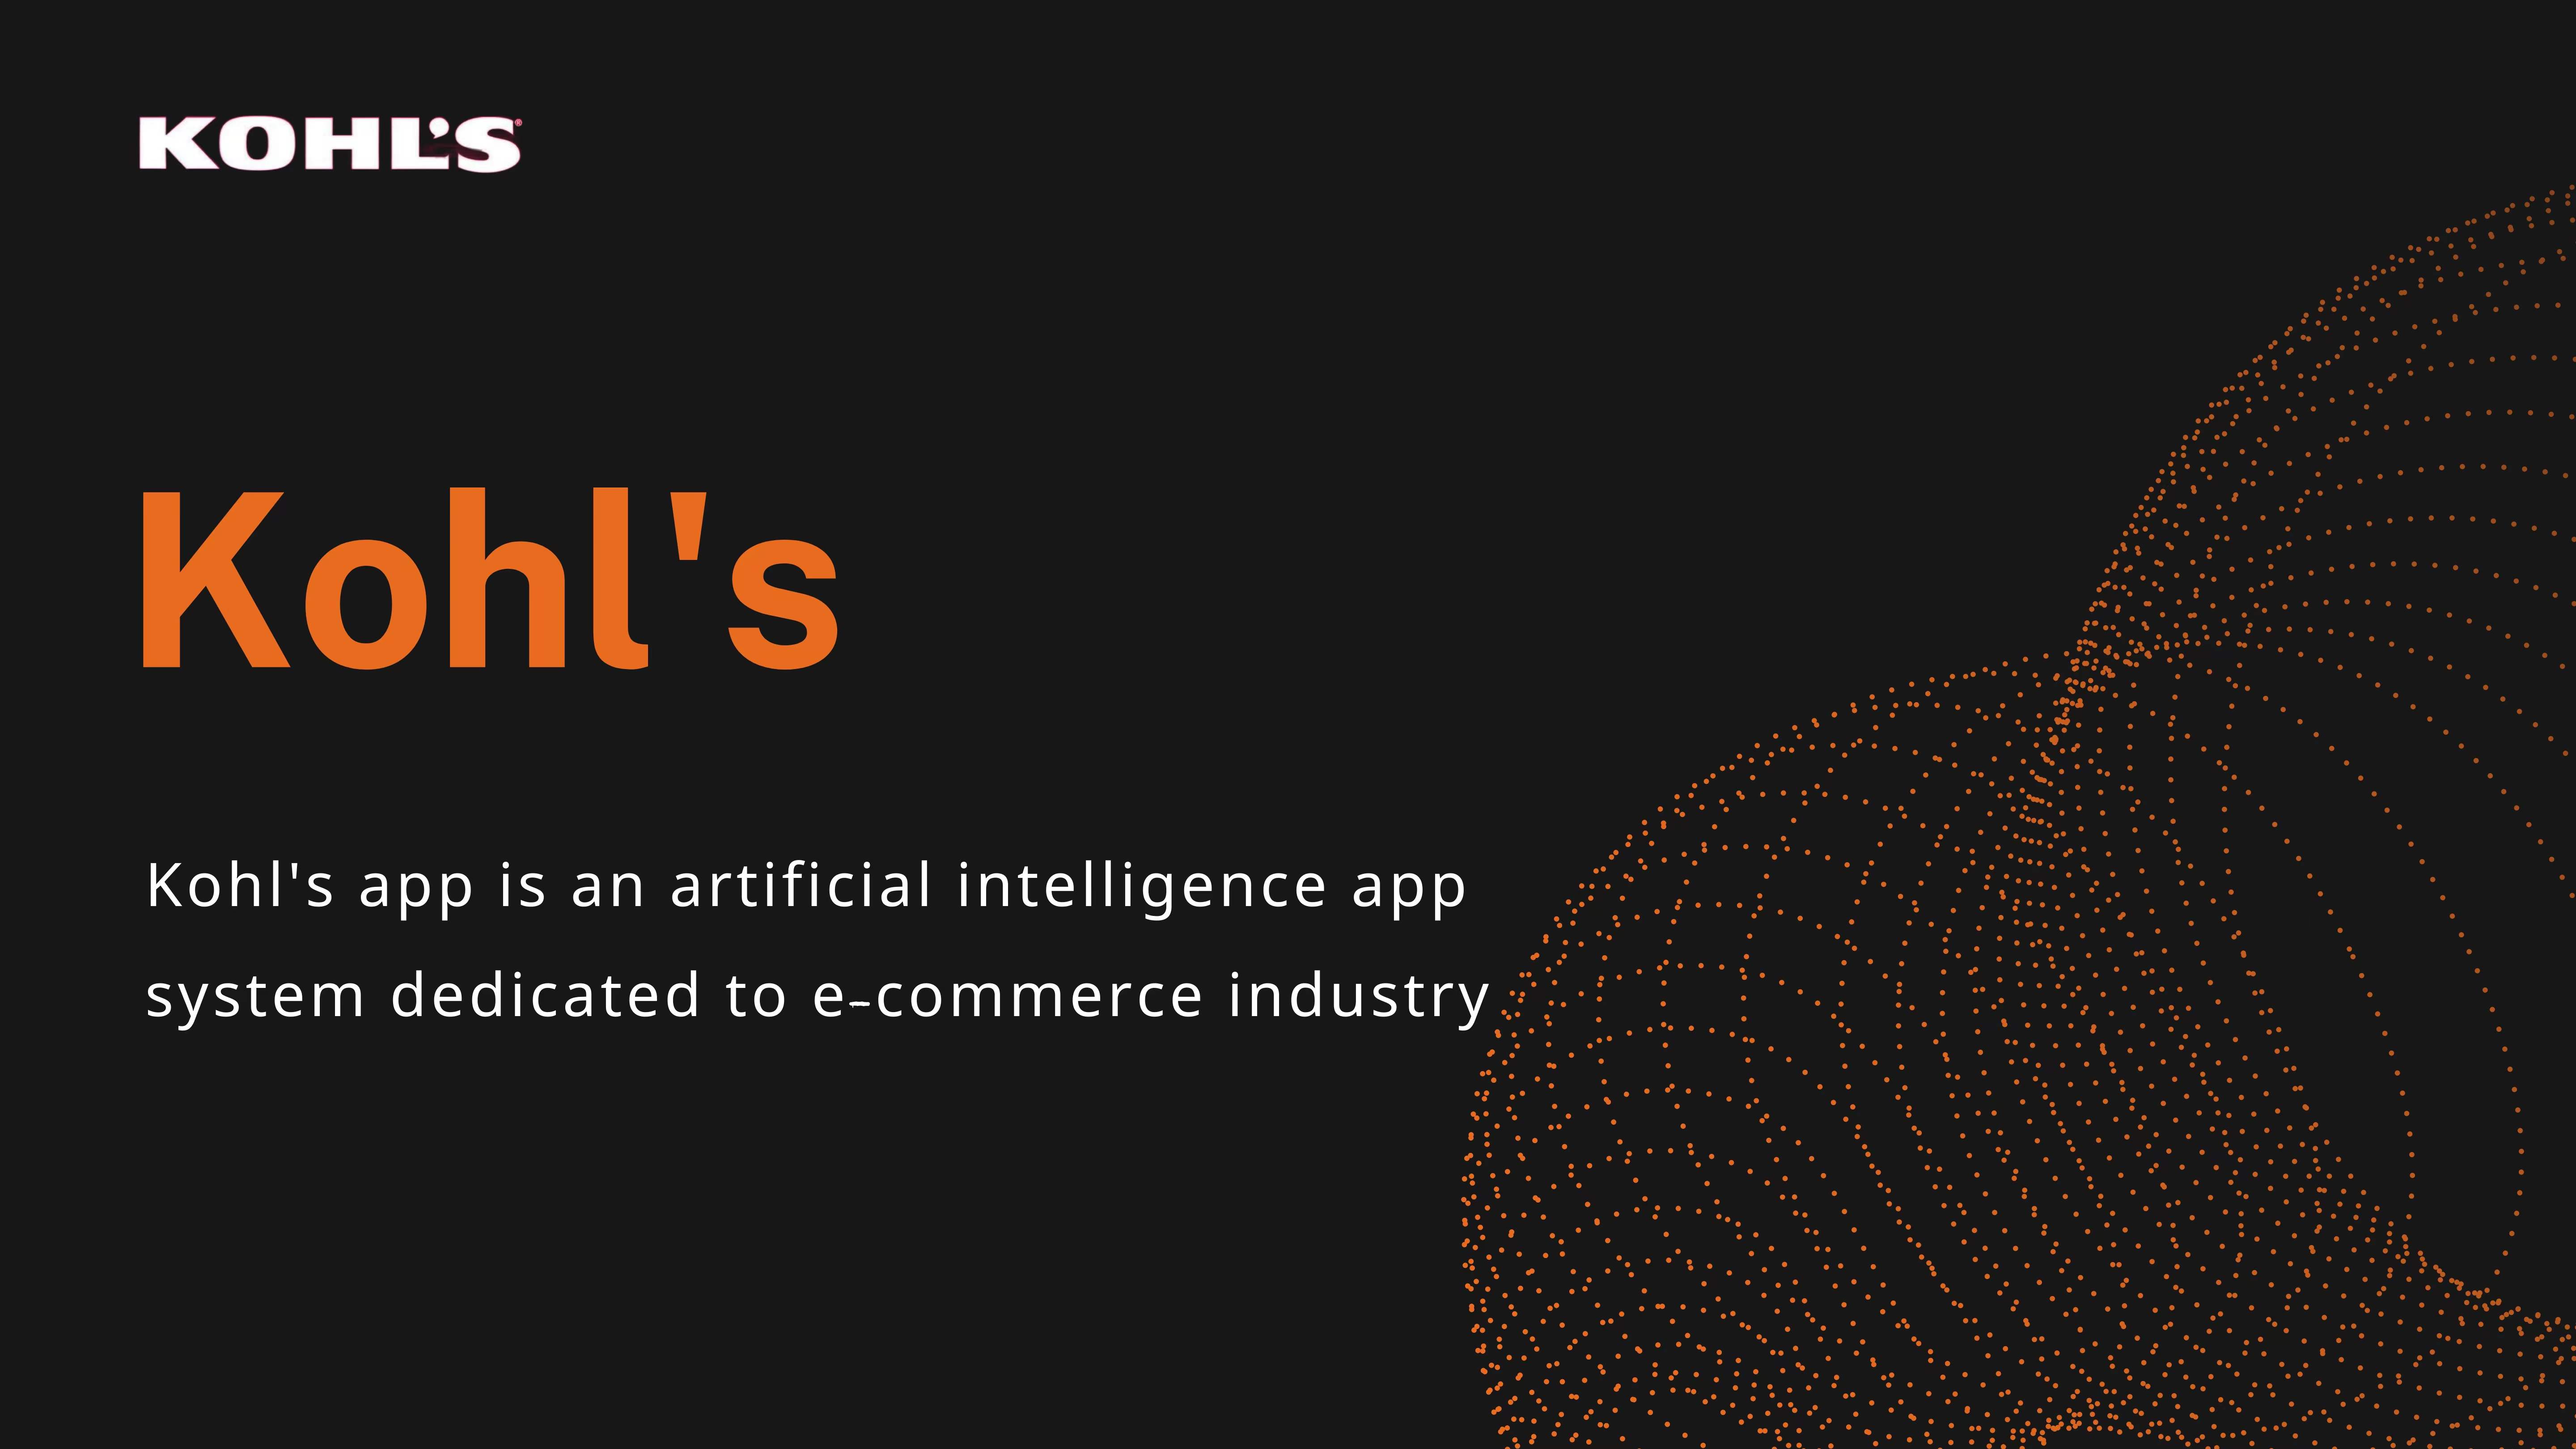 Kohl's app is an artificial intelligence app system dedicated to e-commerce industry